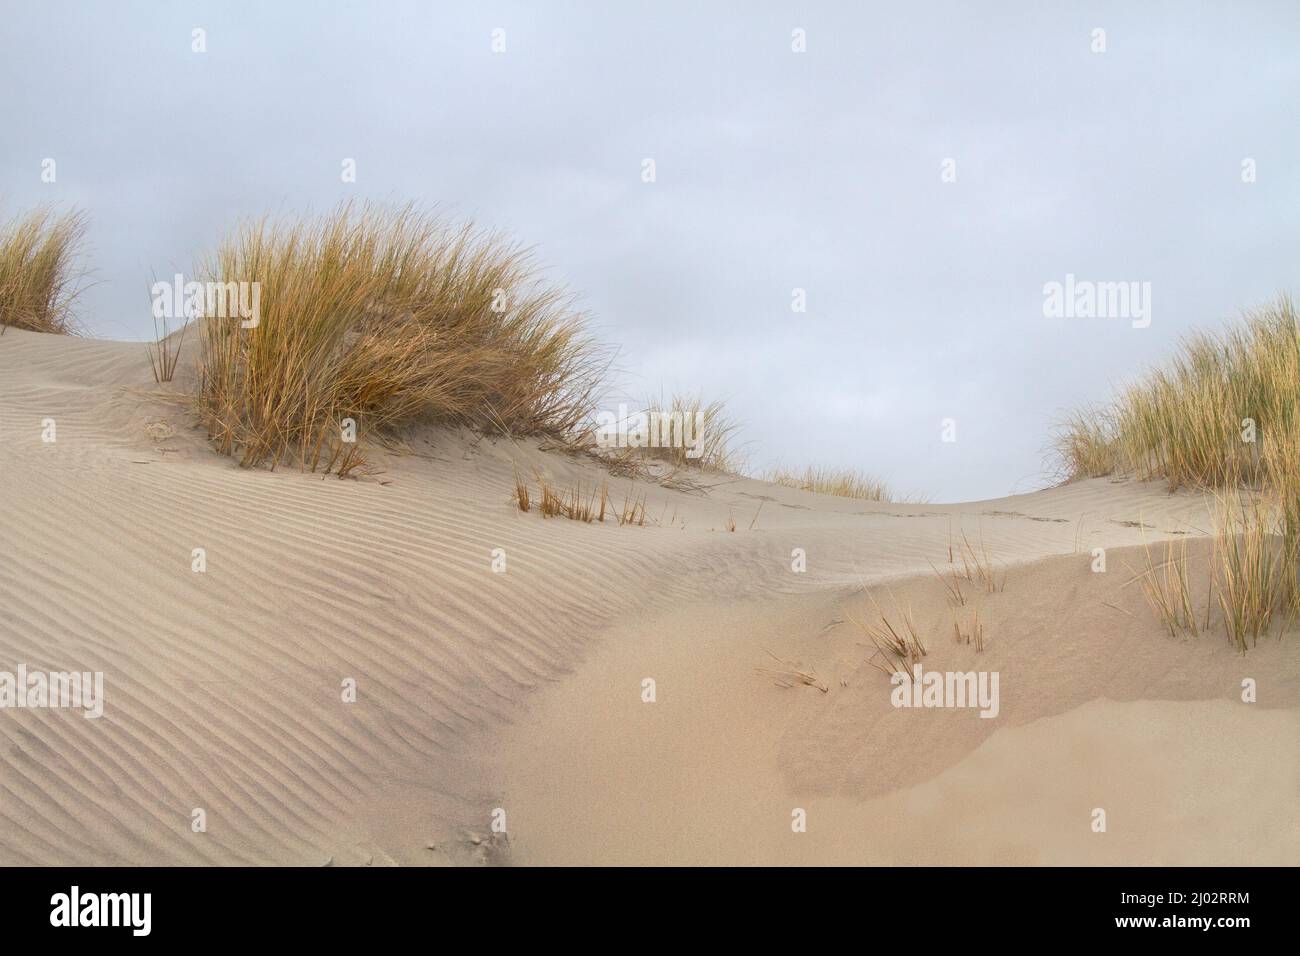 Dunes, grown with Marram grass, ripples in the sand Stock Photo